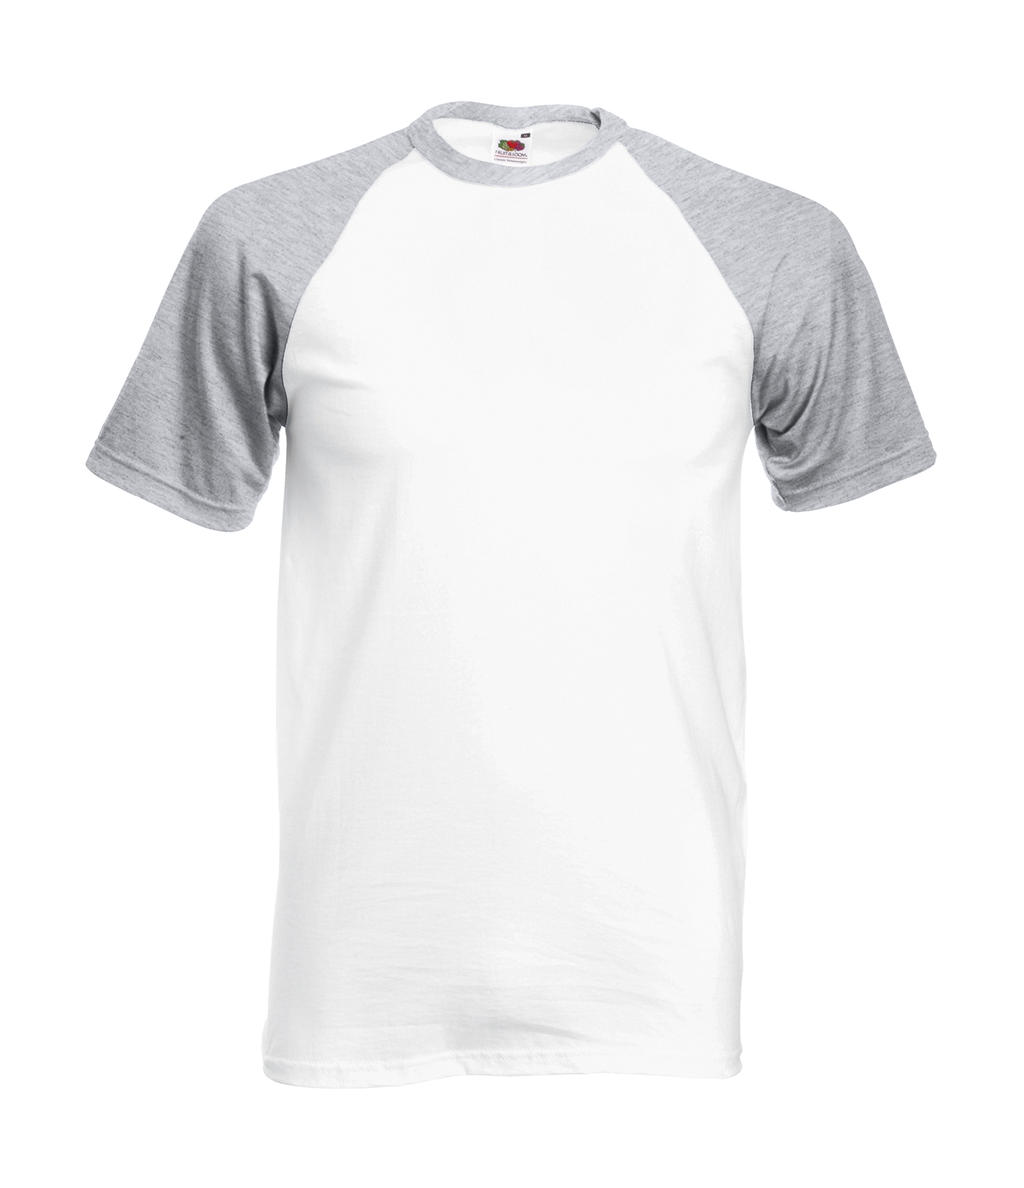  Valueweight Baseball T in Farbe White/Heather Grey